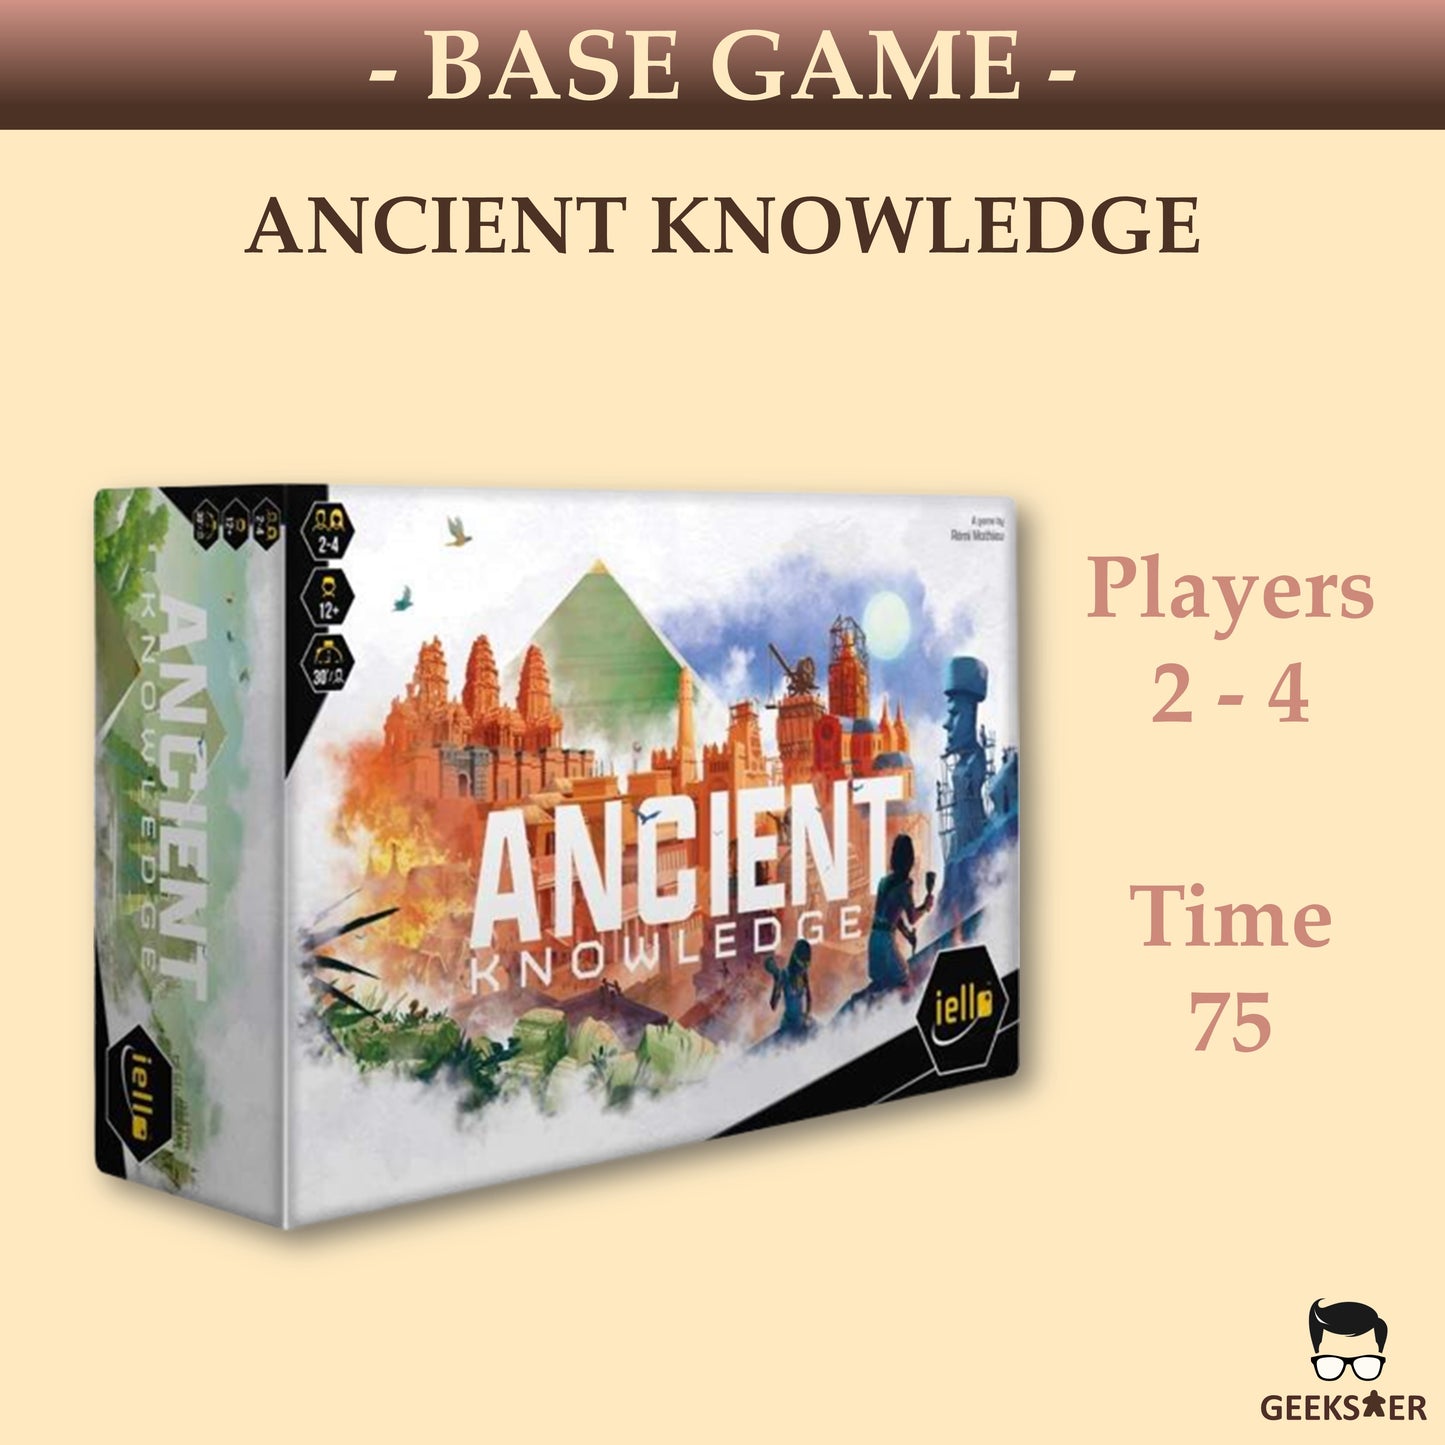 Ancient Knowledge with Promo Cards